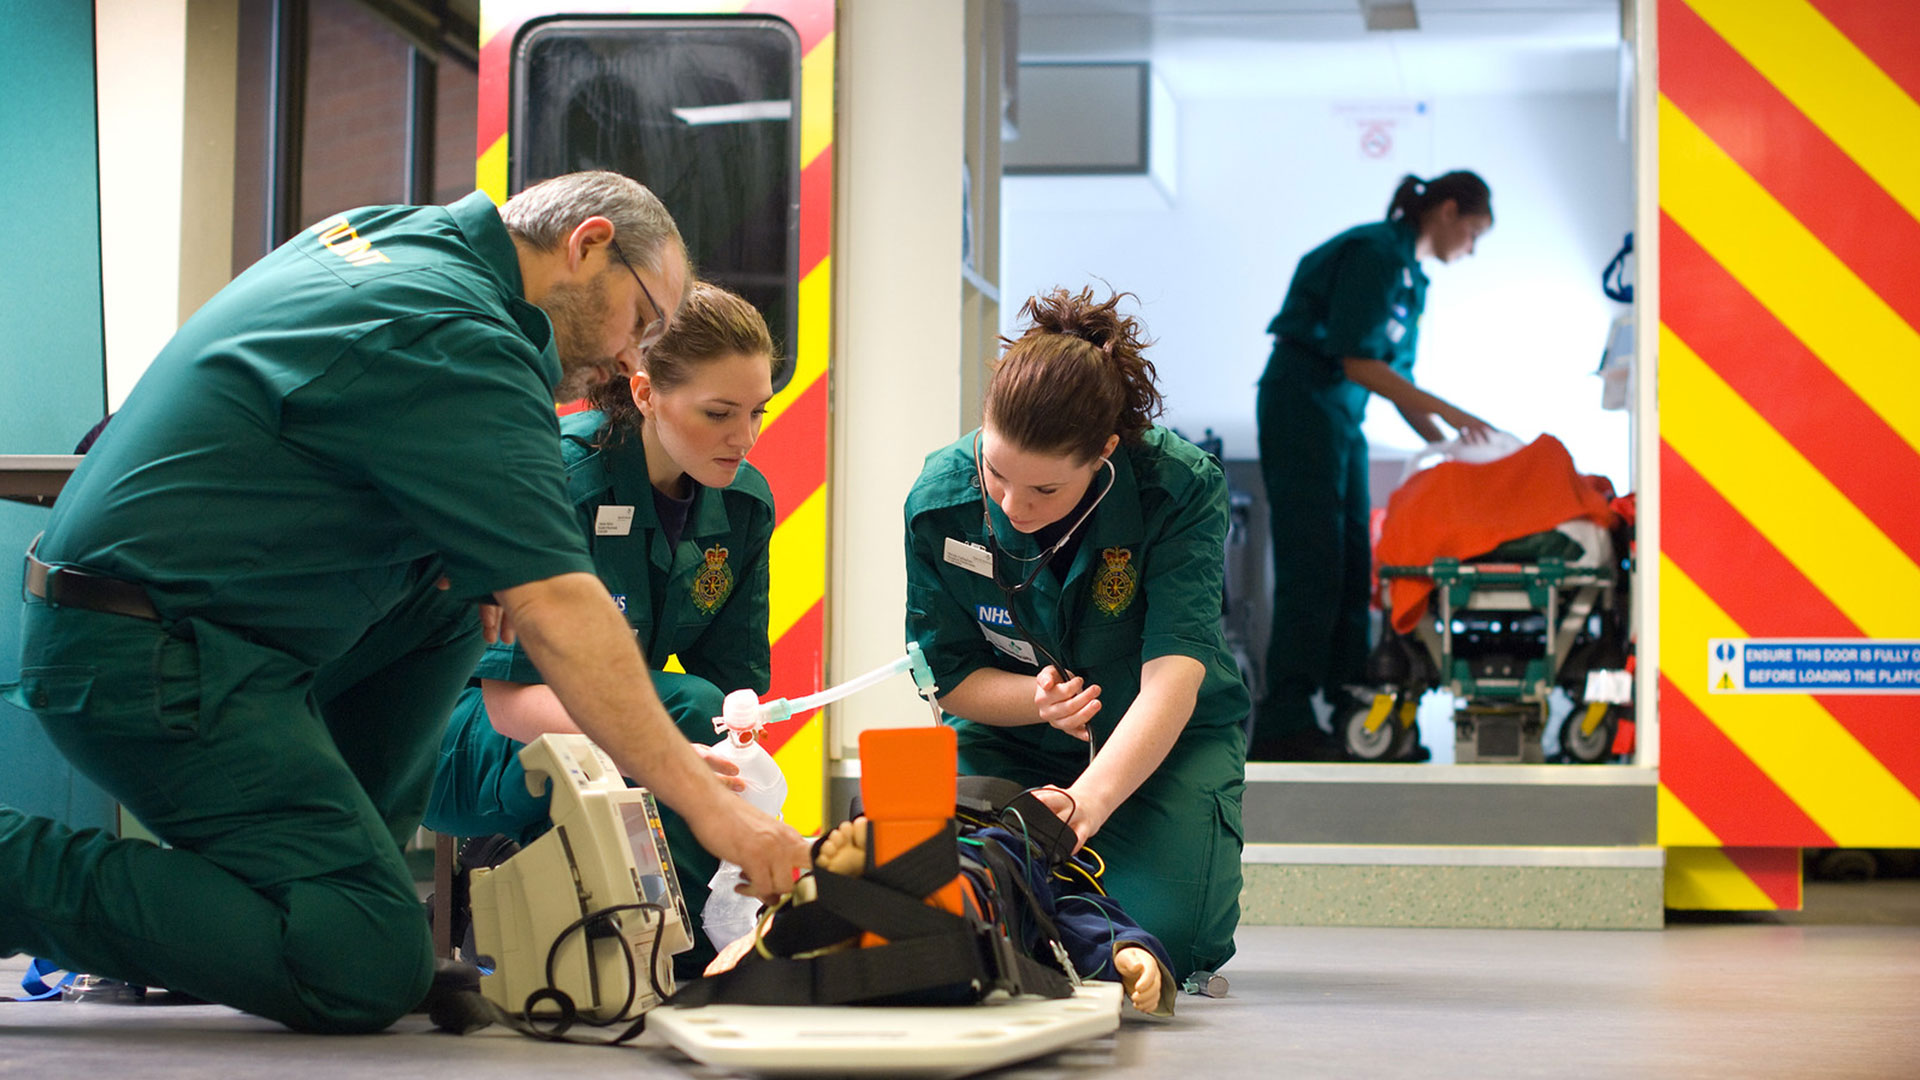 Paramedic Practice students carrying out a paramedic simulation situation at the St. James' campus